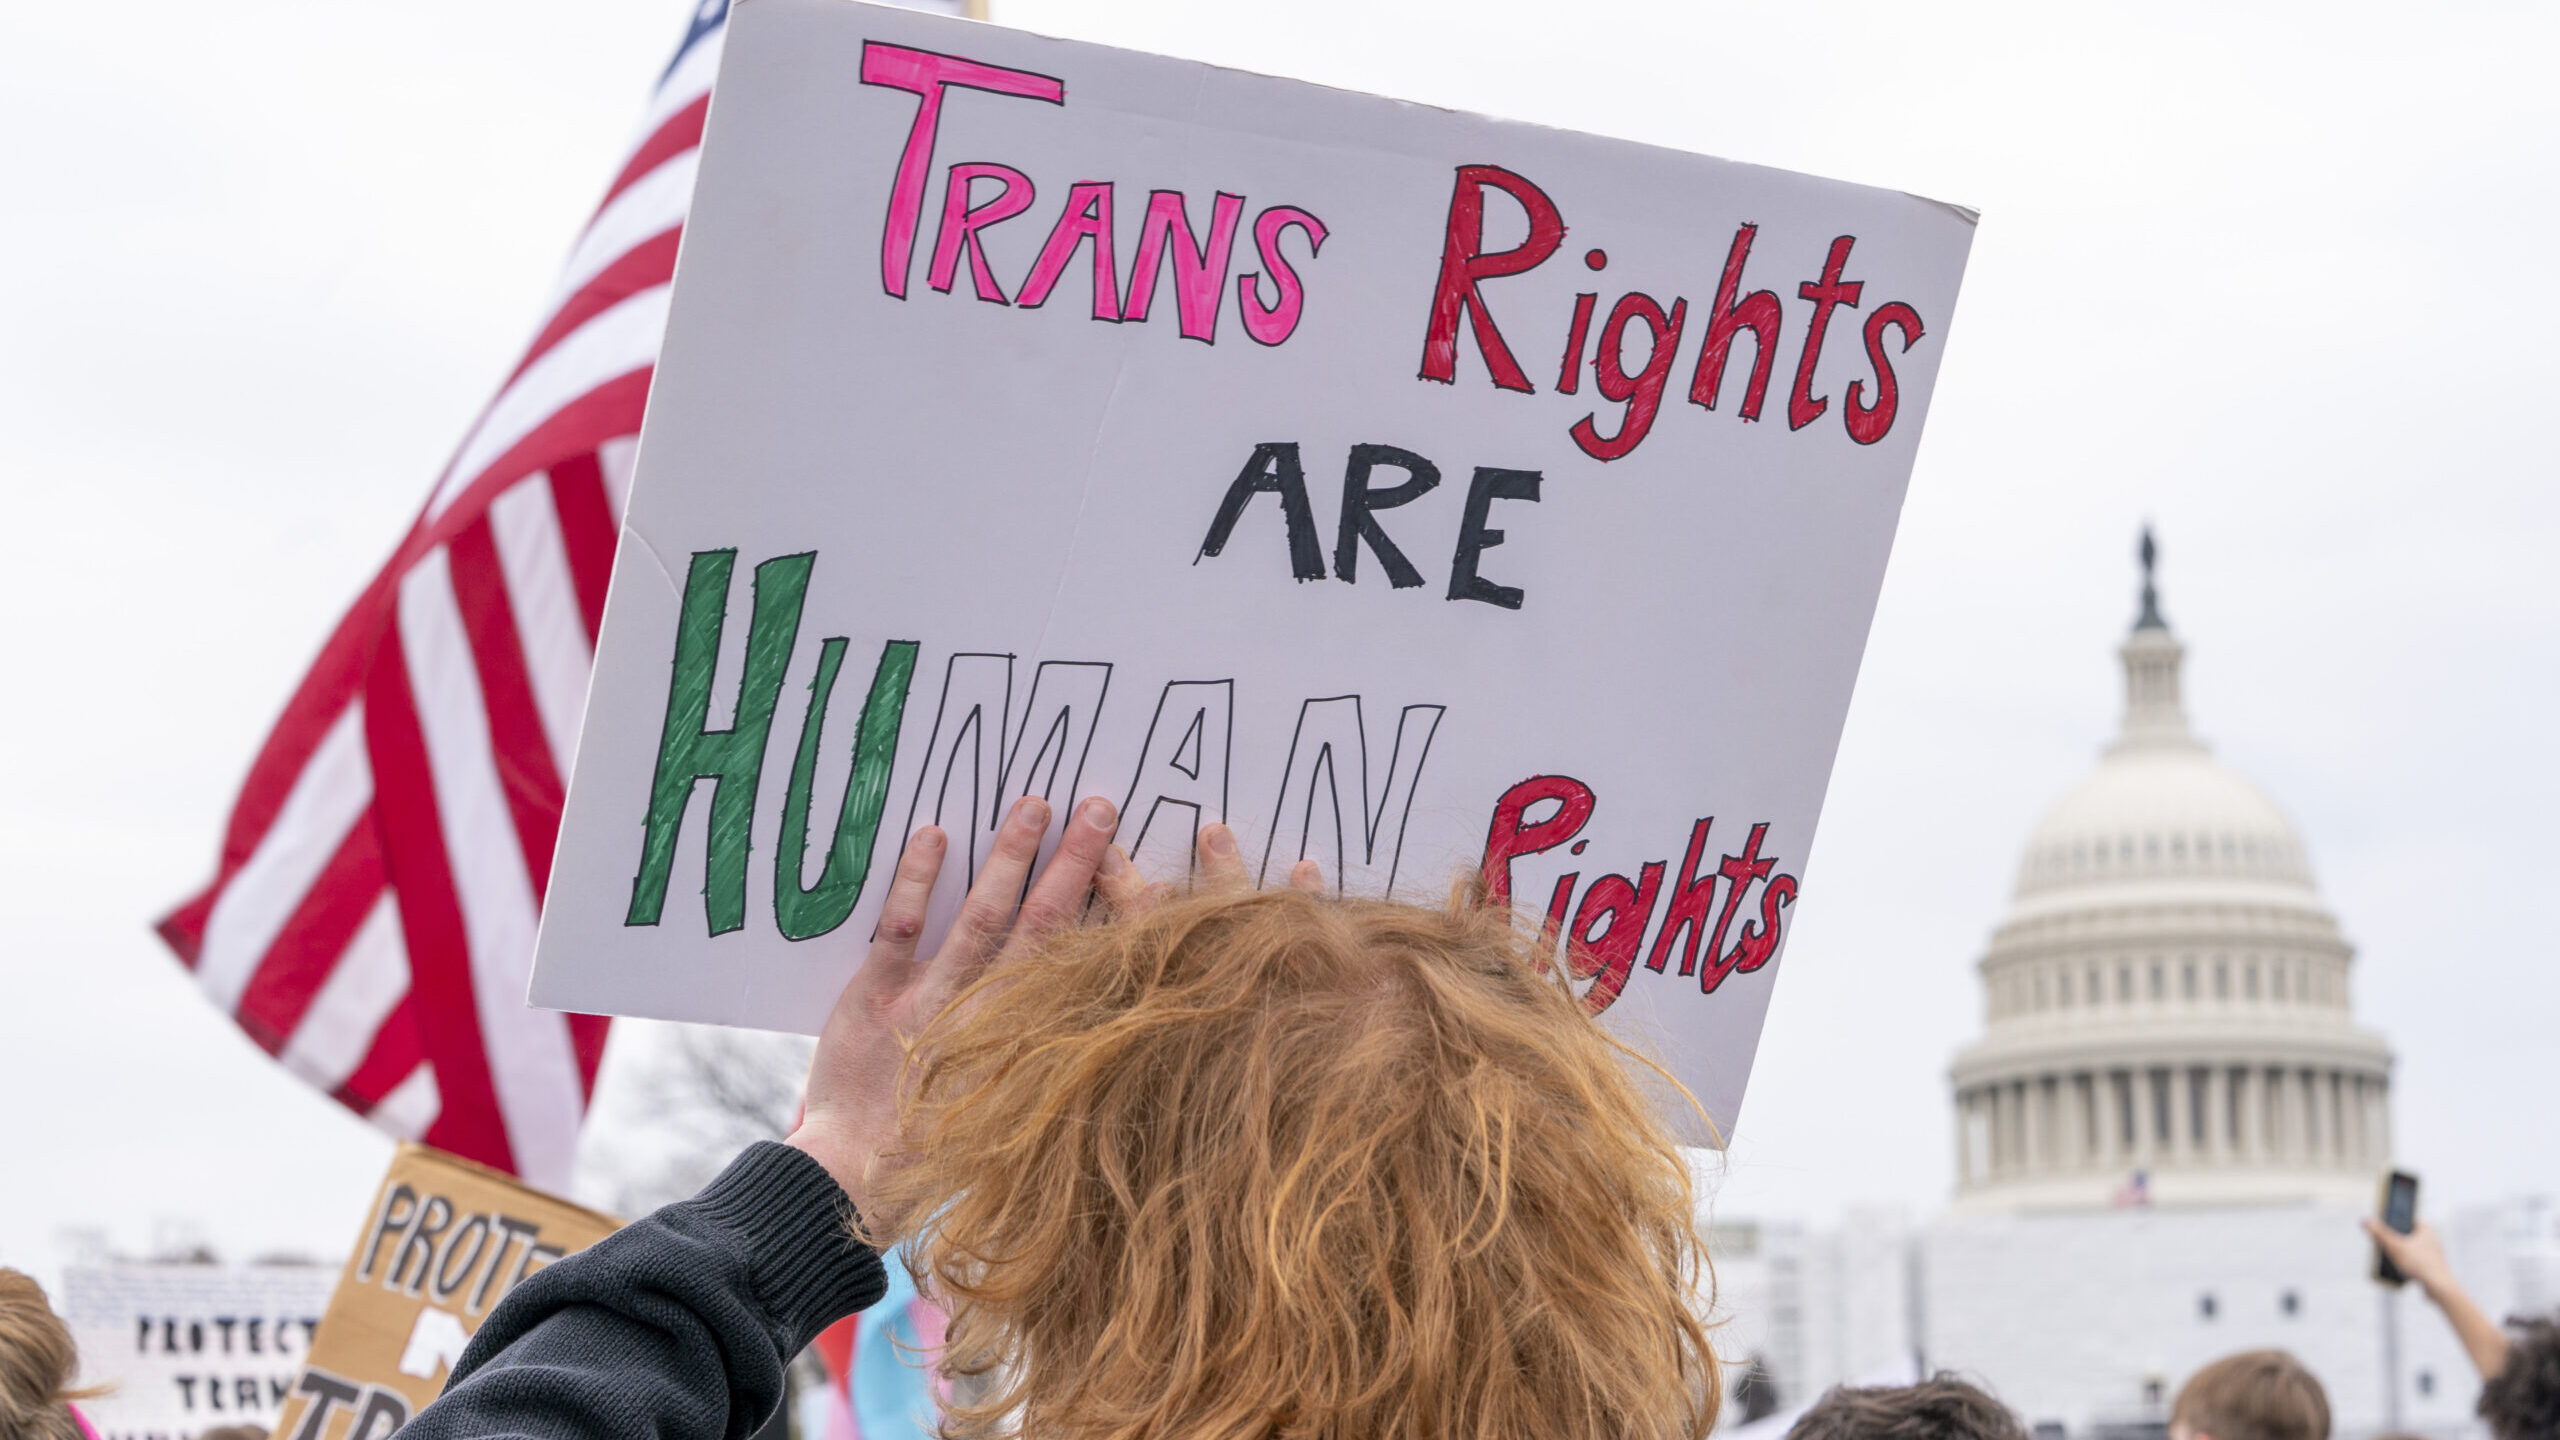 Schools and colleges across the U.S. would be forbidden from enacting outright bans on transgender ...